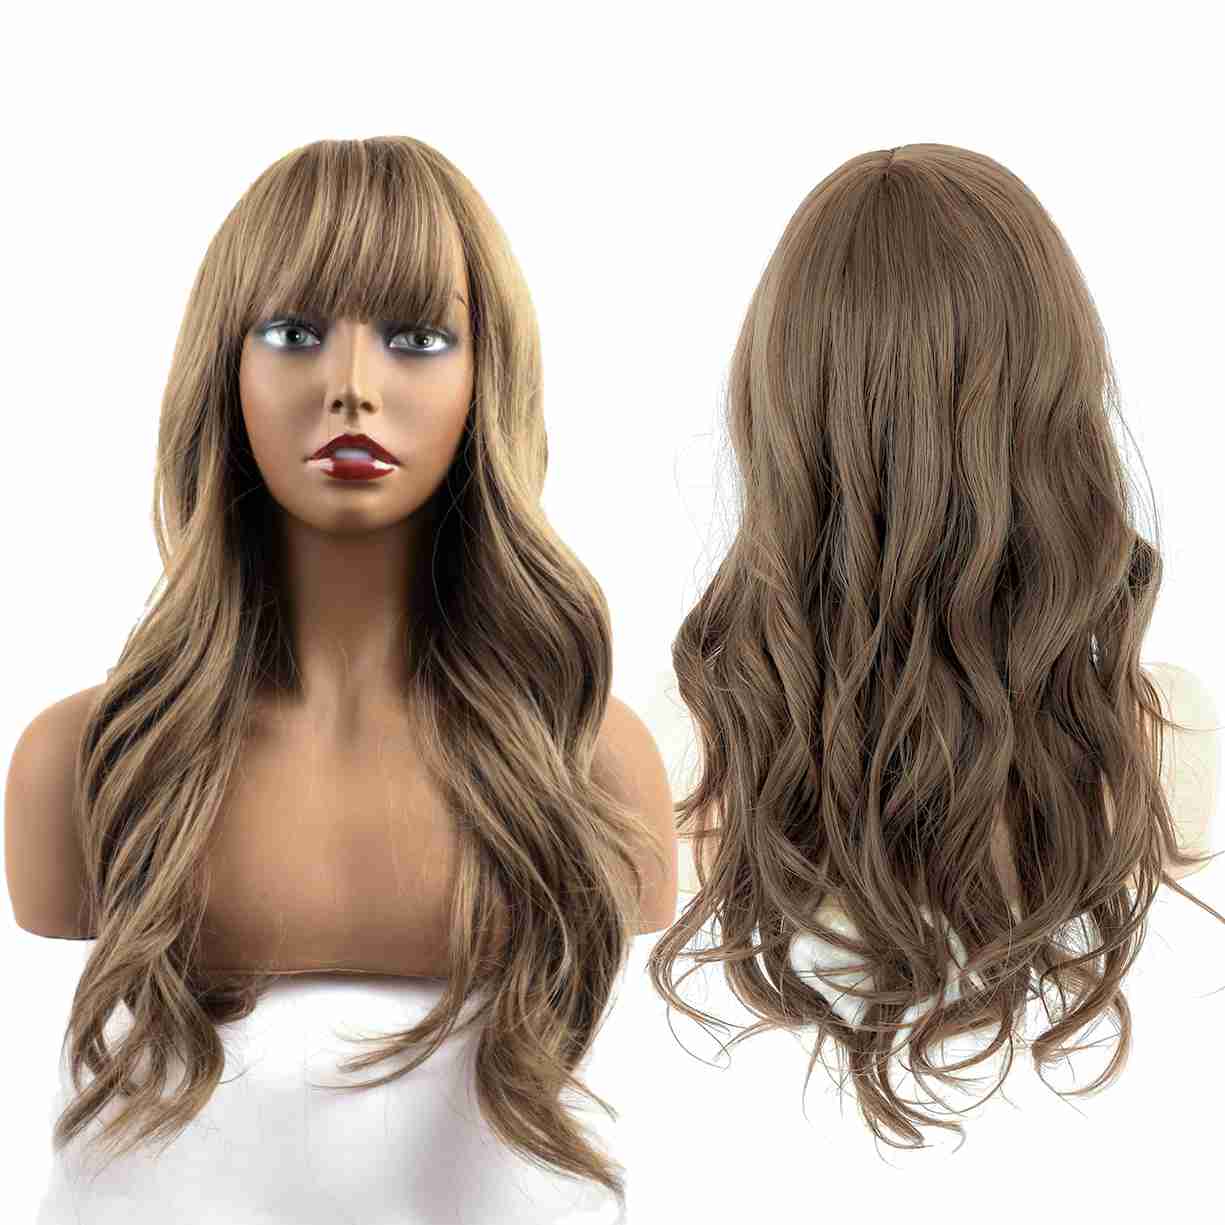 wigs-with-bangs with cash back rebate